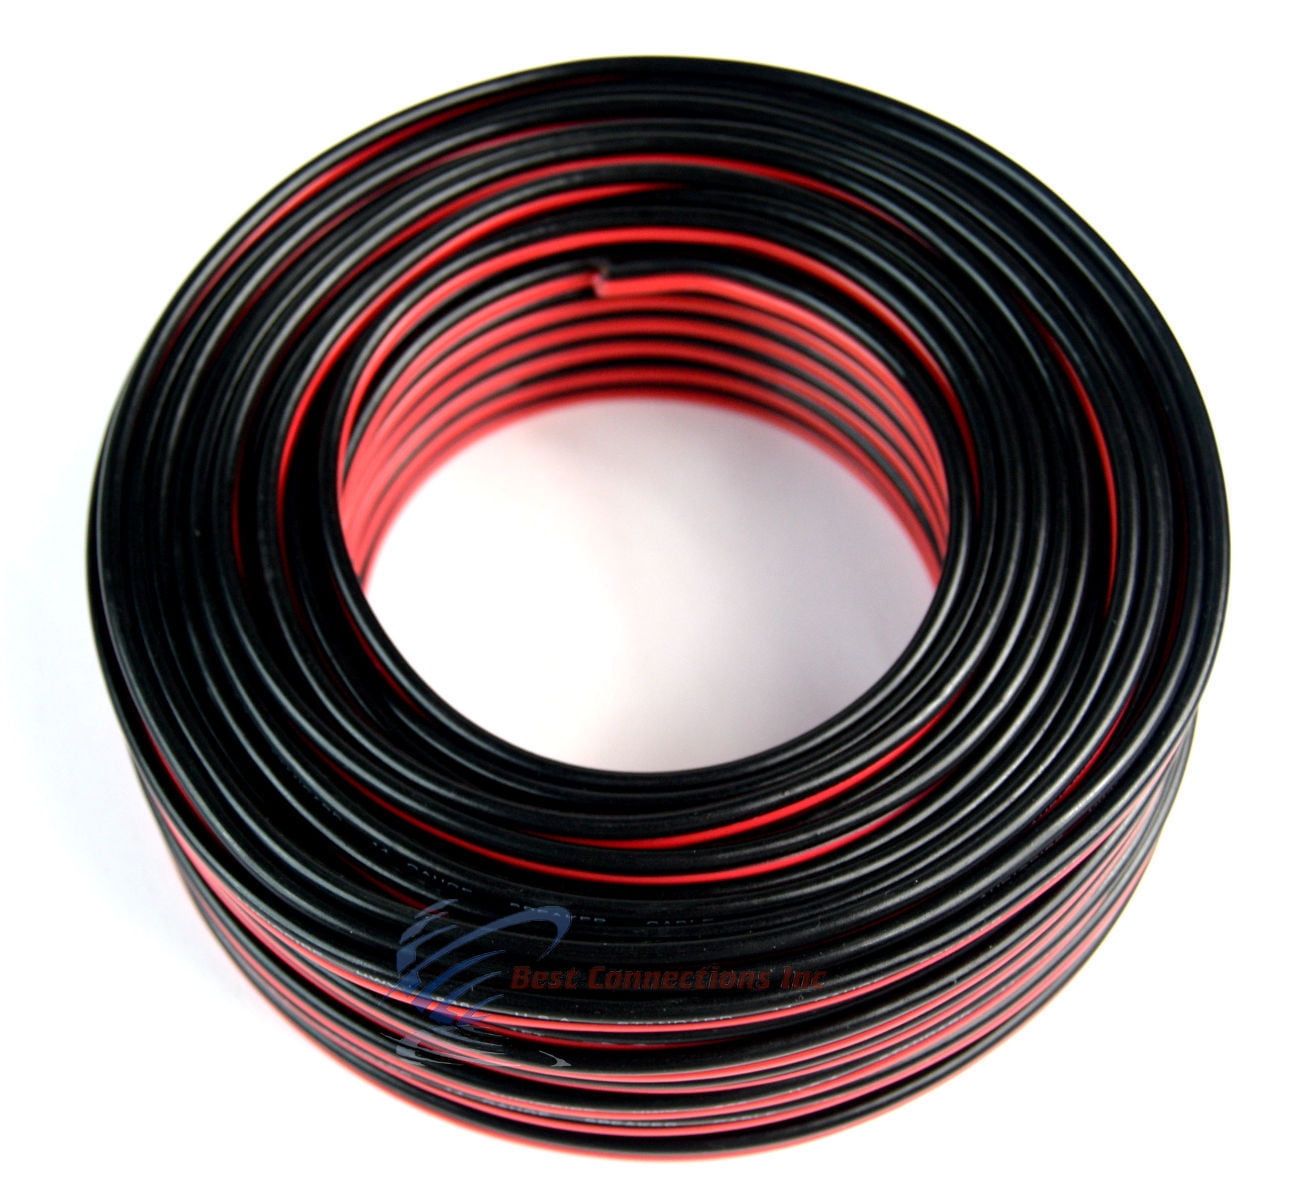 14 Gauge 30' ft SPEAKER WIRE Red Black Cable Car Audio Home Stereo 12V DC Power 